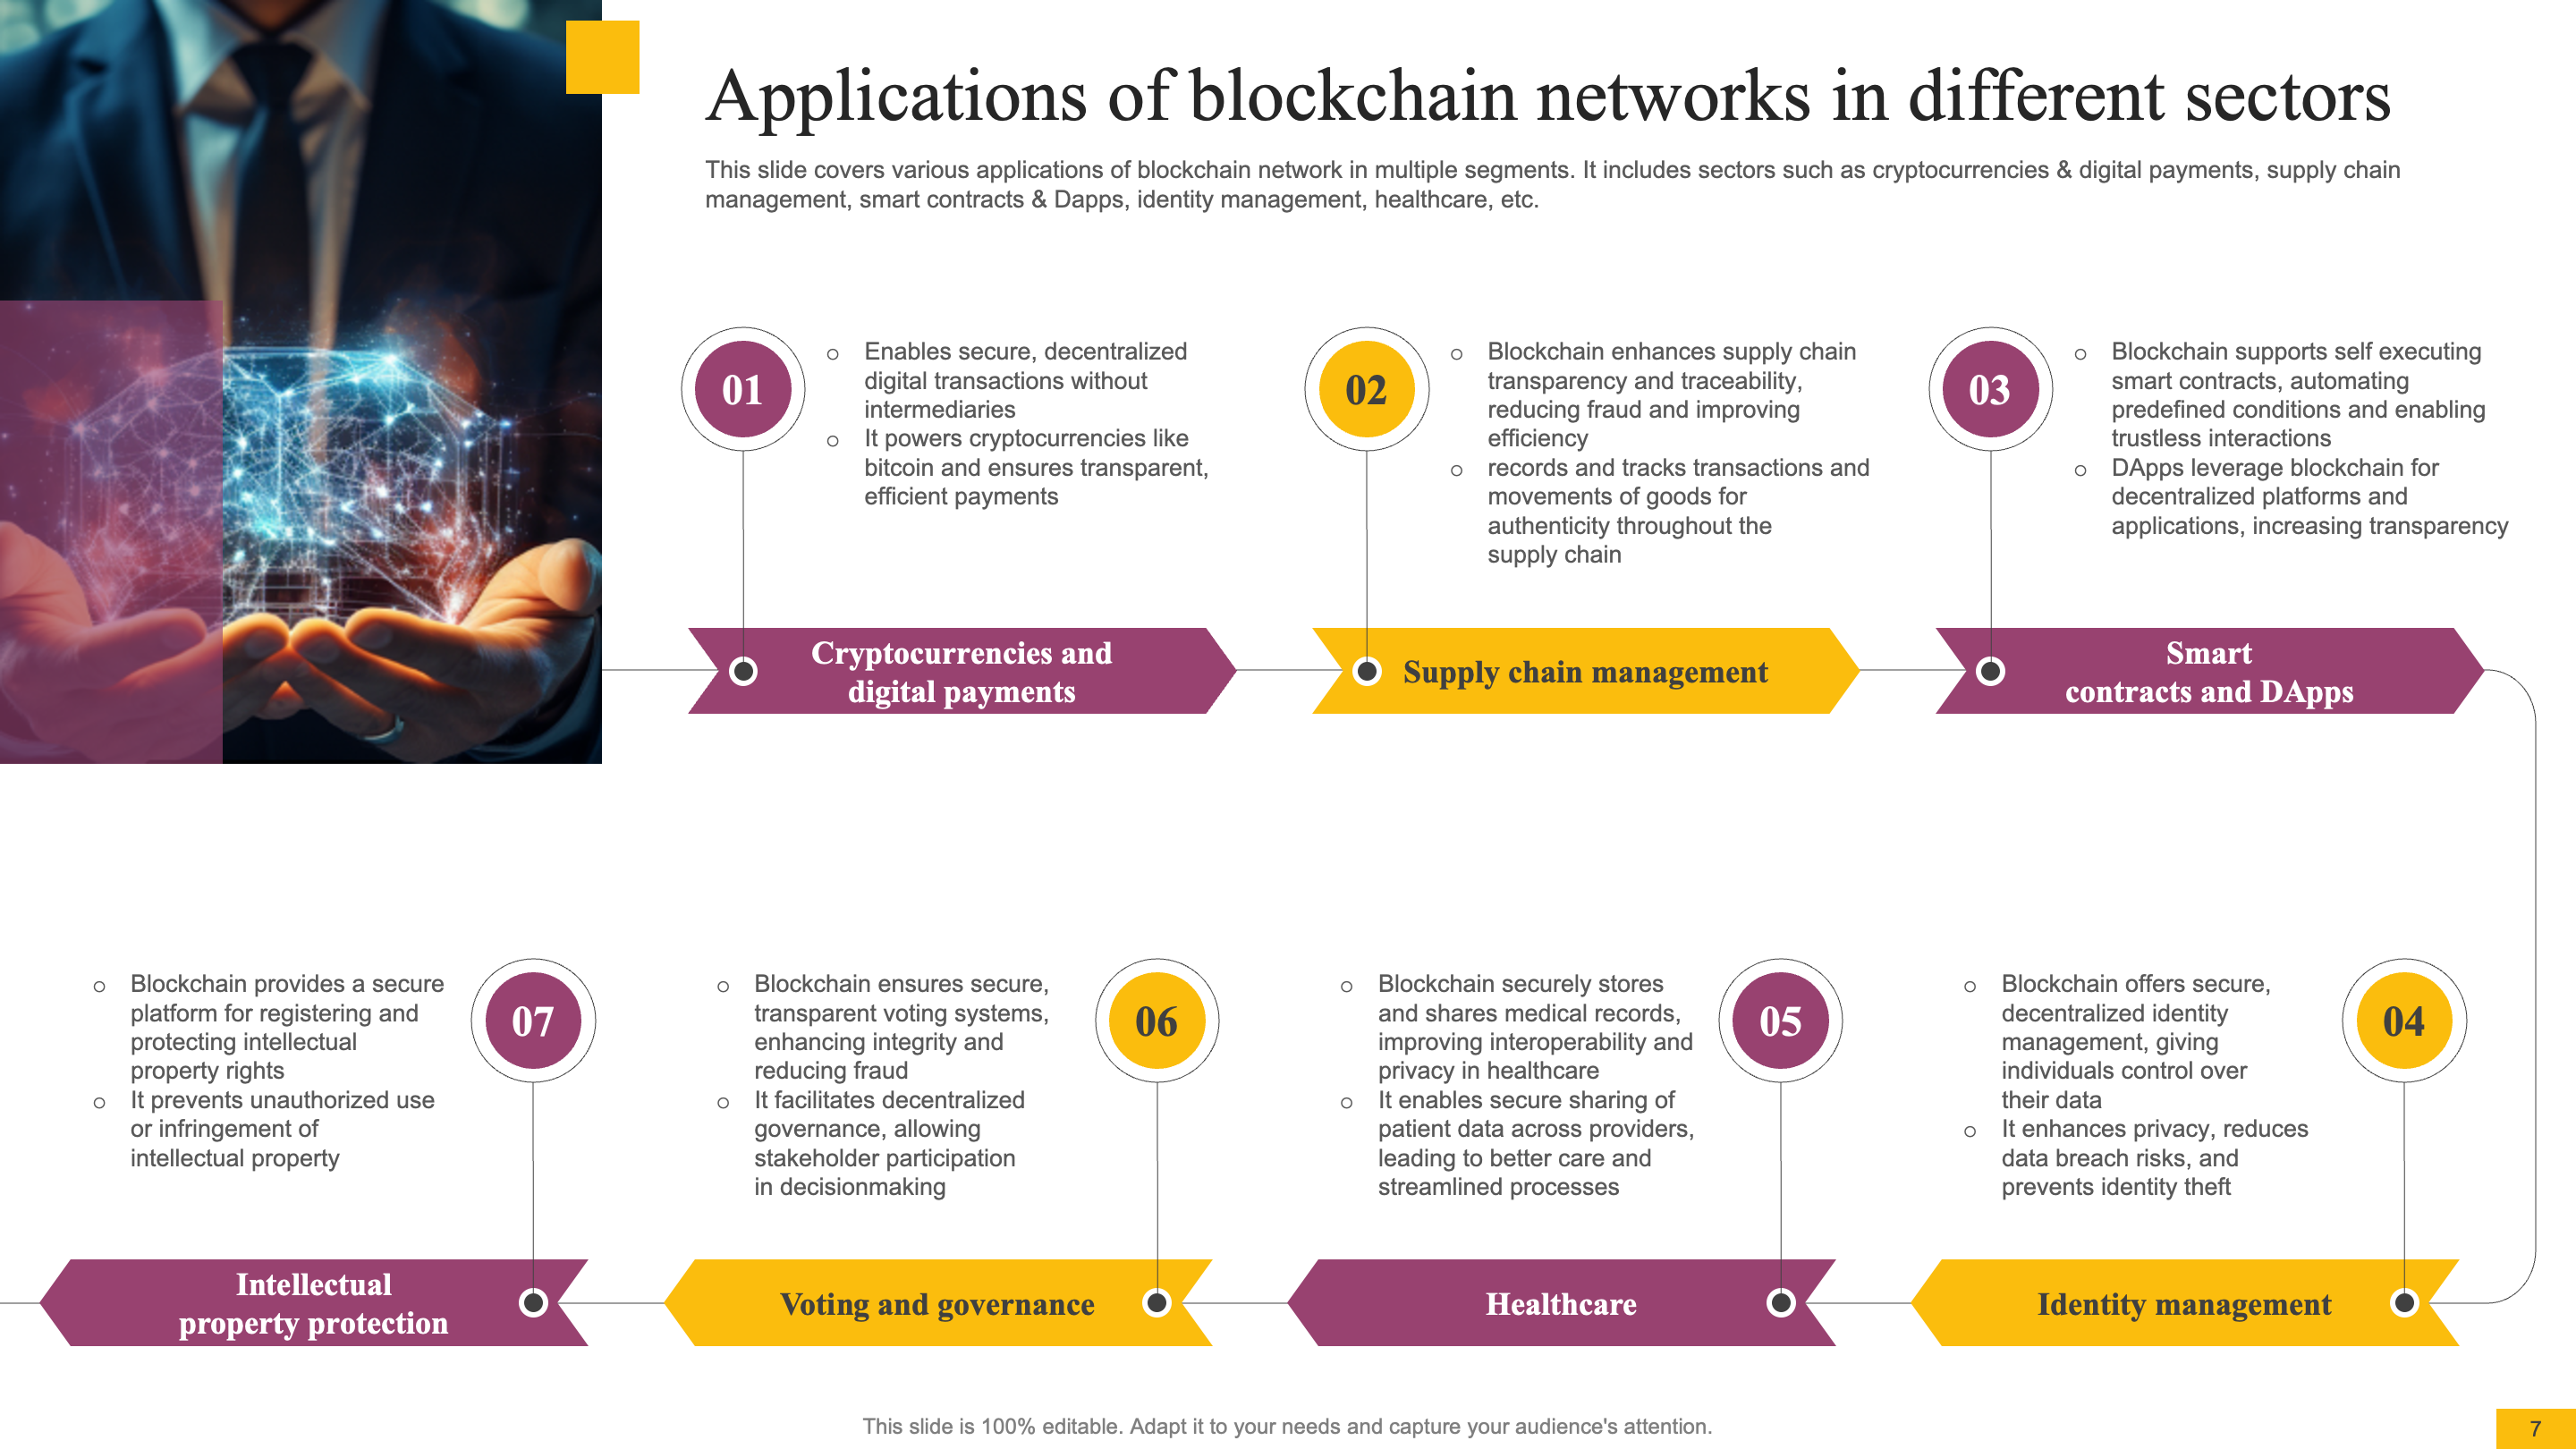 Applications of blockchain networks in different sectors